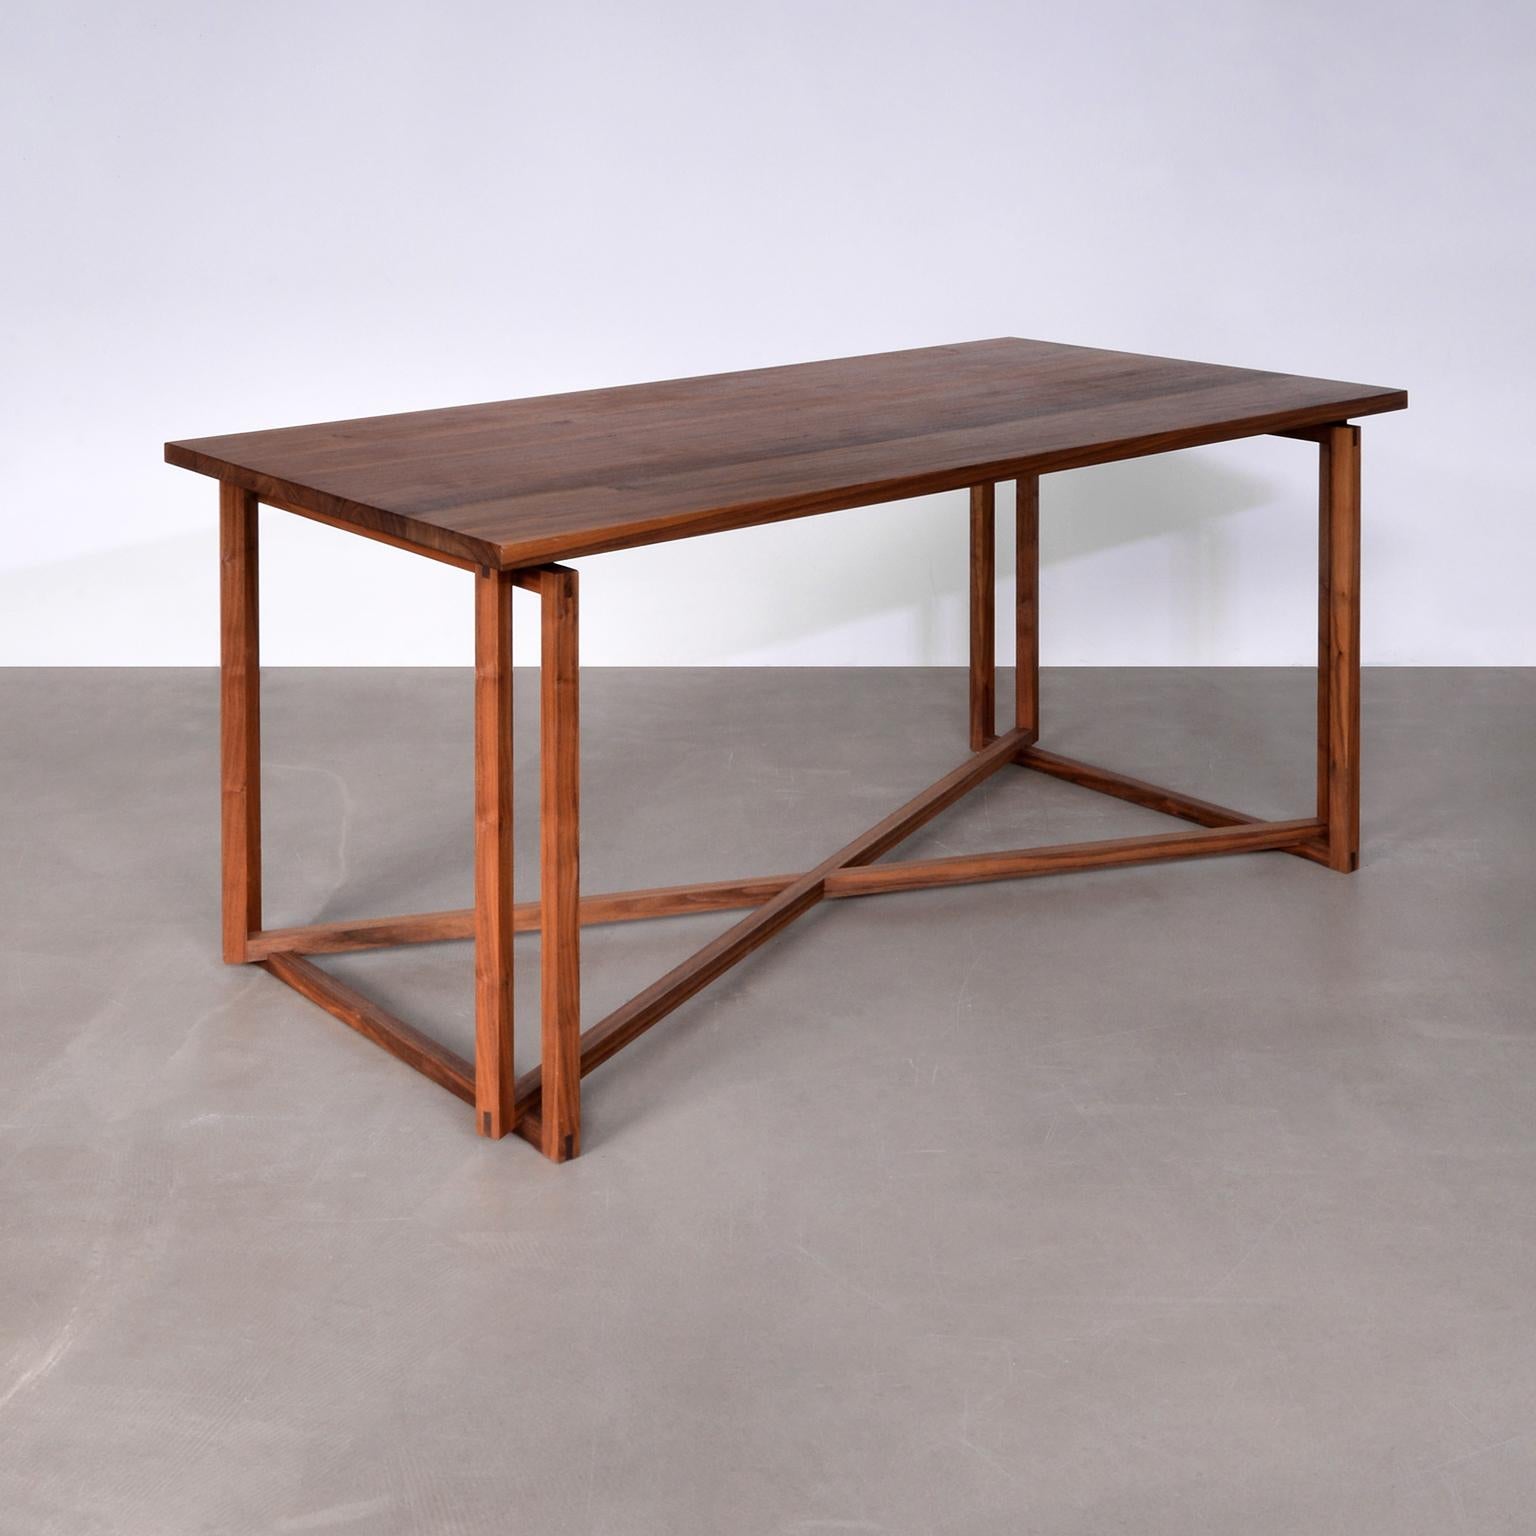 Minimalist Unique Hand Crafted Table in Solid Walnut Wood by Laura Maasry, Berlin, 2020 For Sale